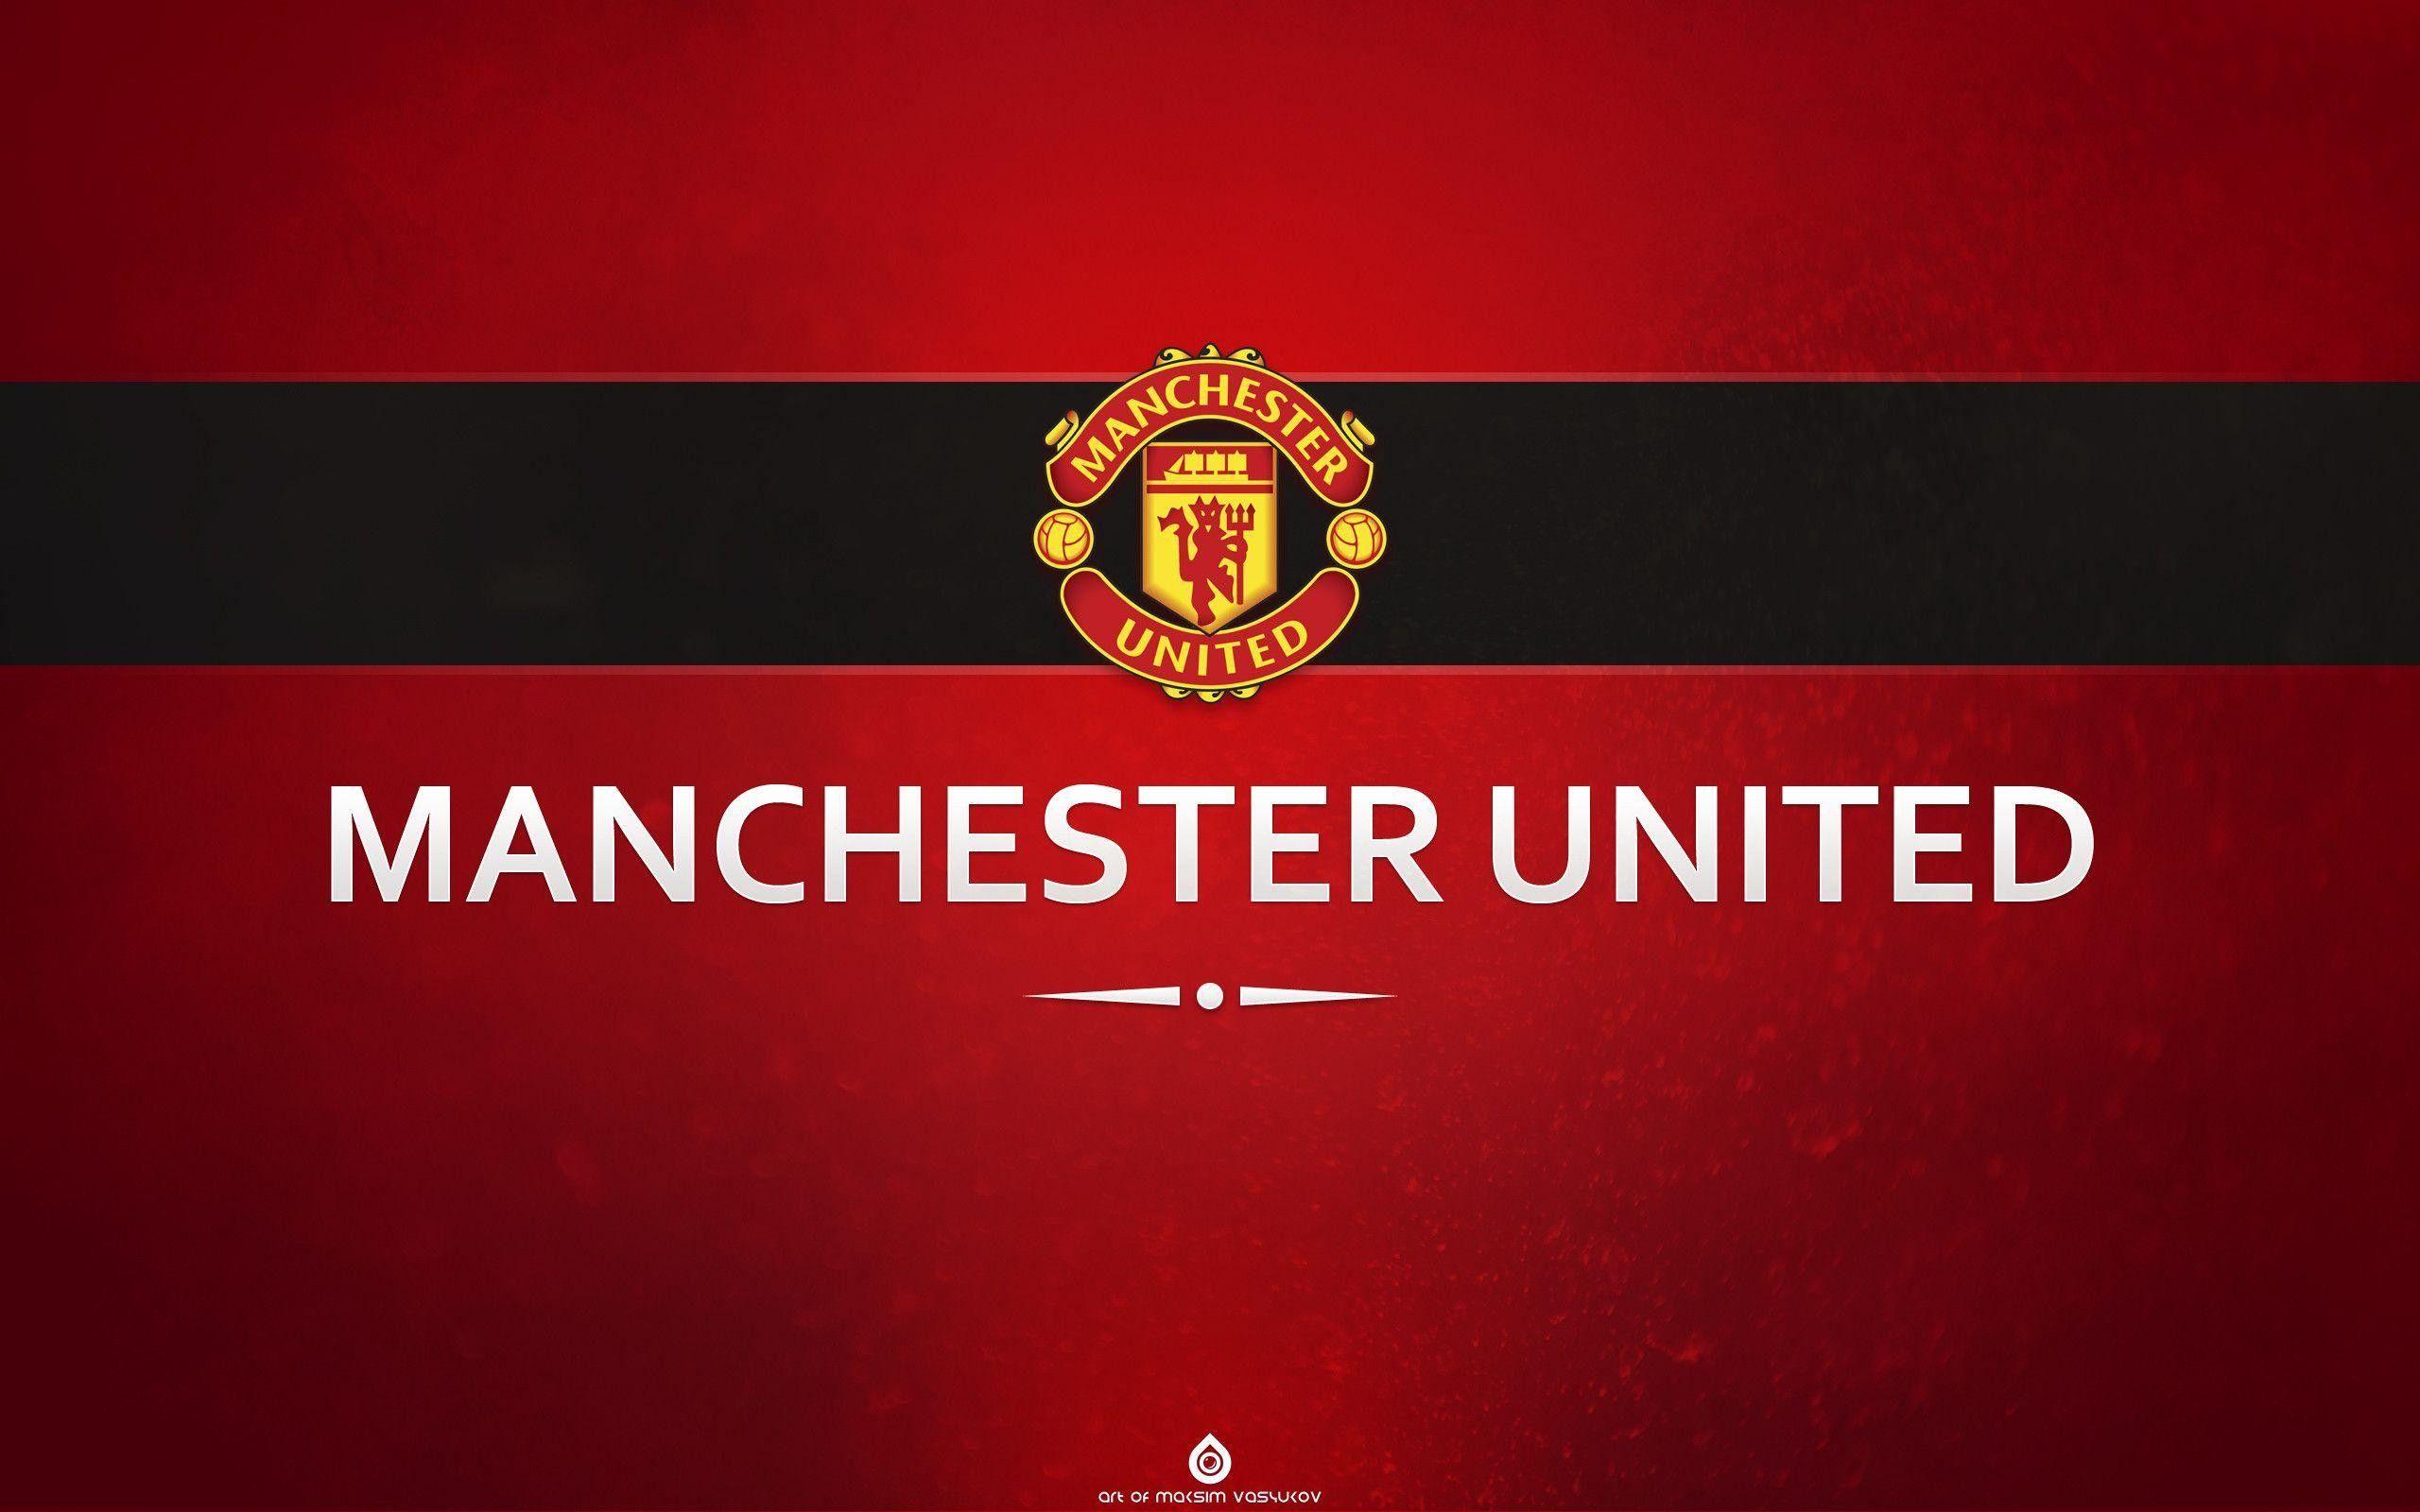 Man United Wallpaper (the best image in 2018)